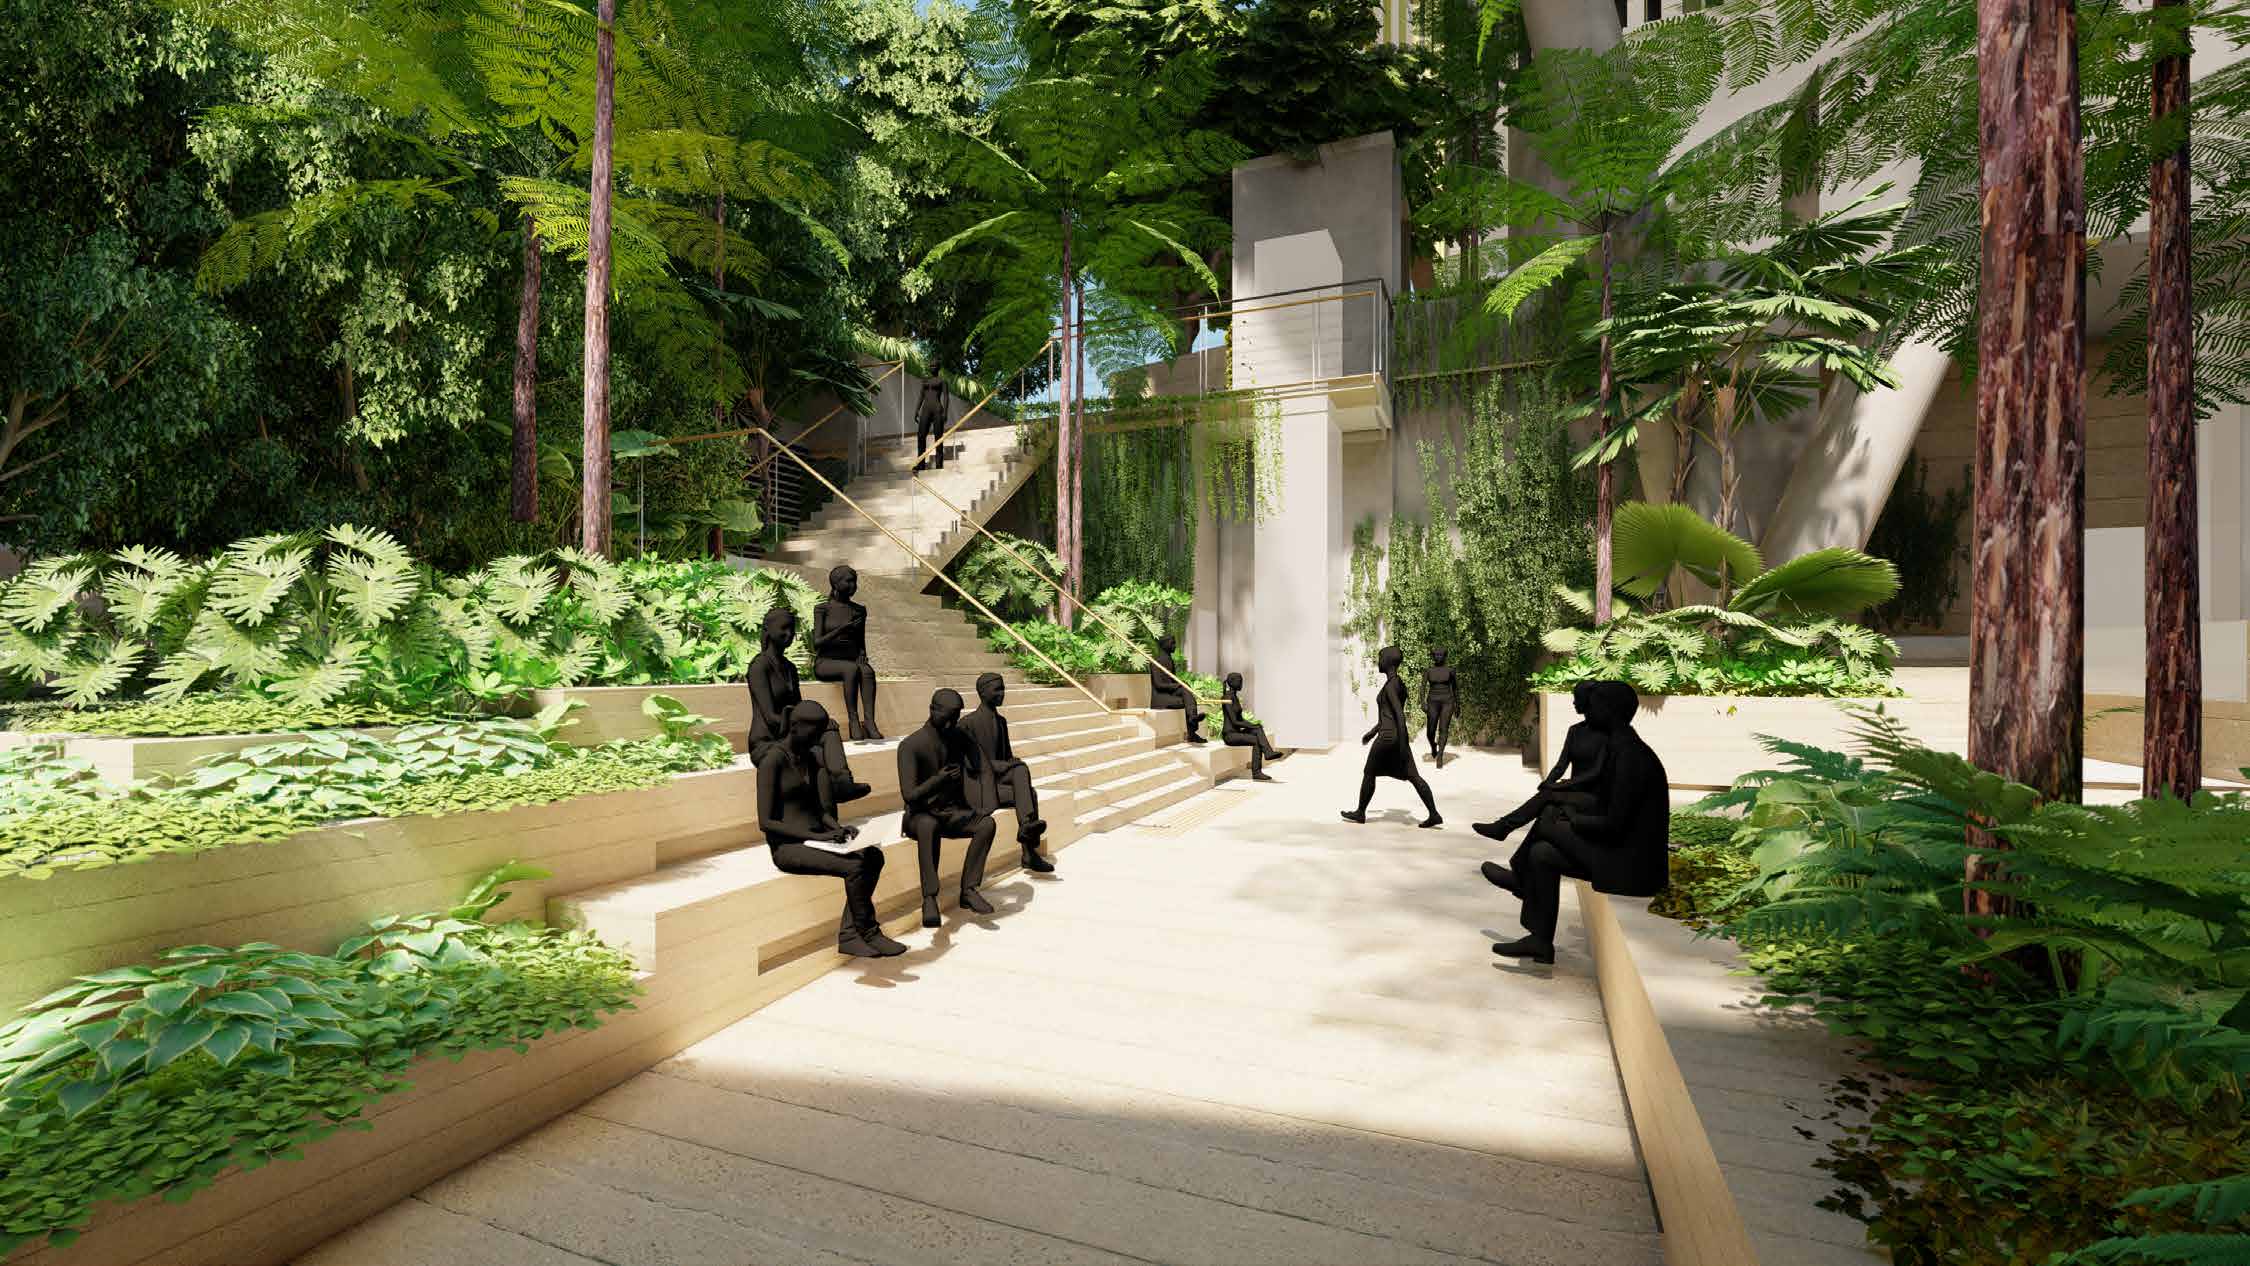 Architectural rendering of the proposed ground level landscaping